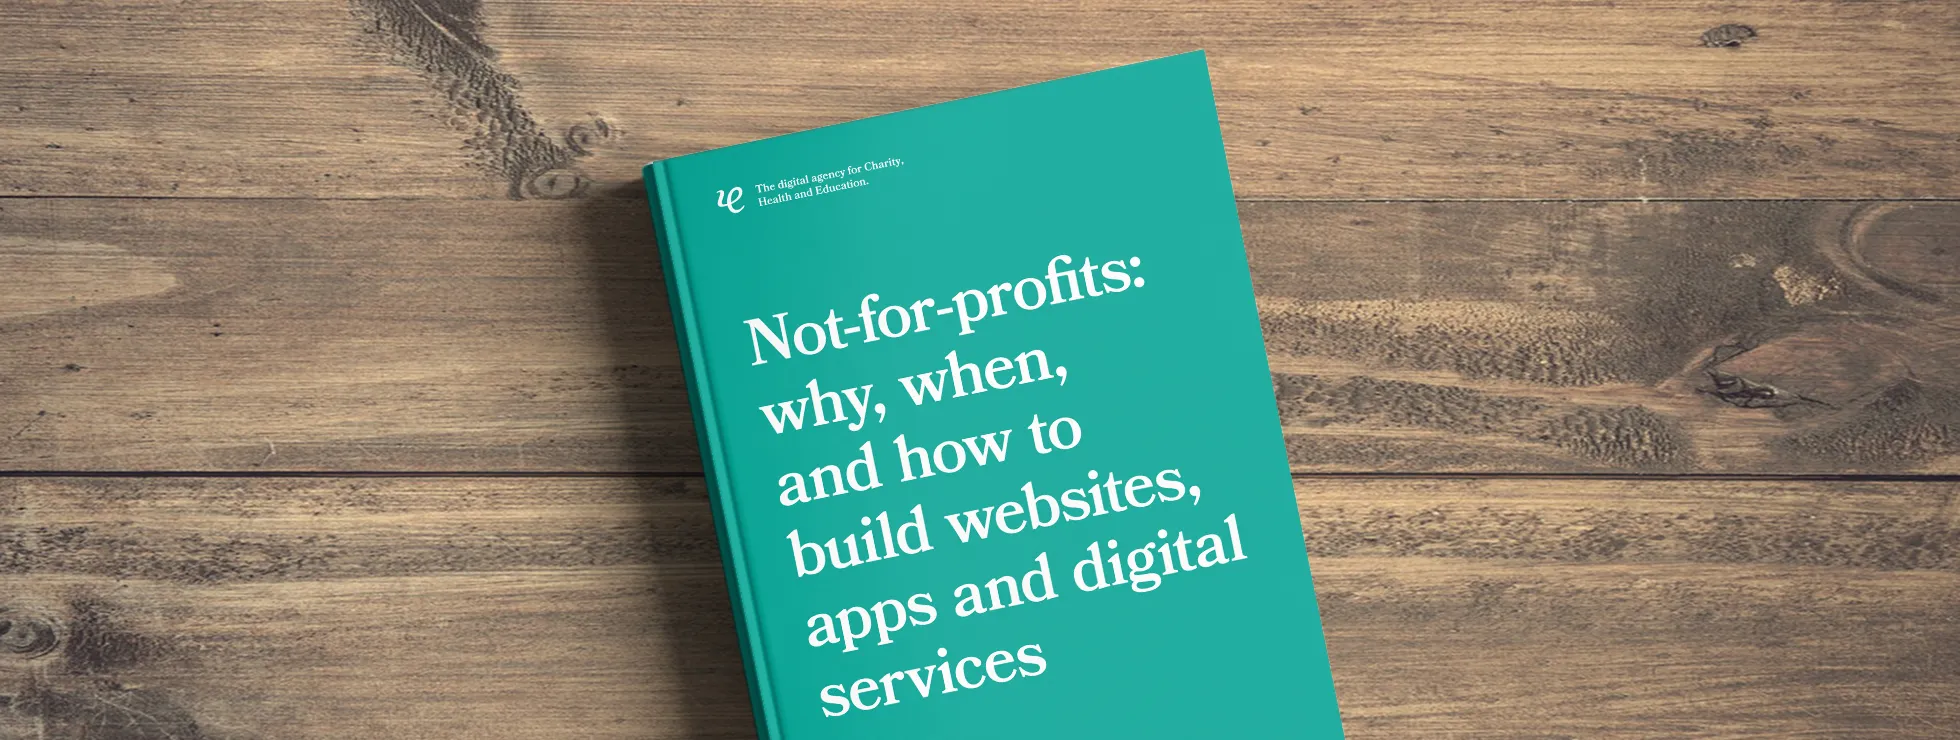 Cover of IE Digital white paper Not-for-profits: Why, when and how to build websites, apps and digital services